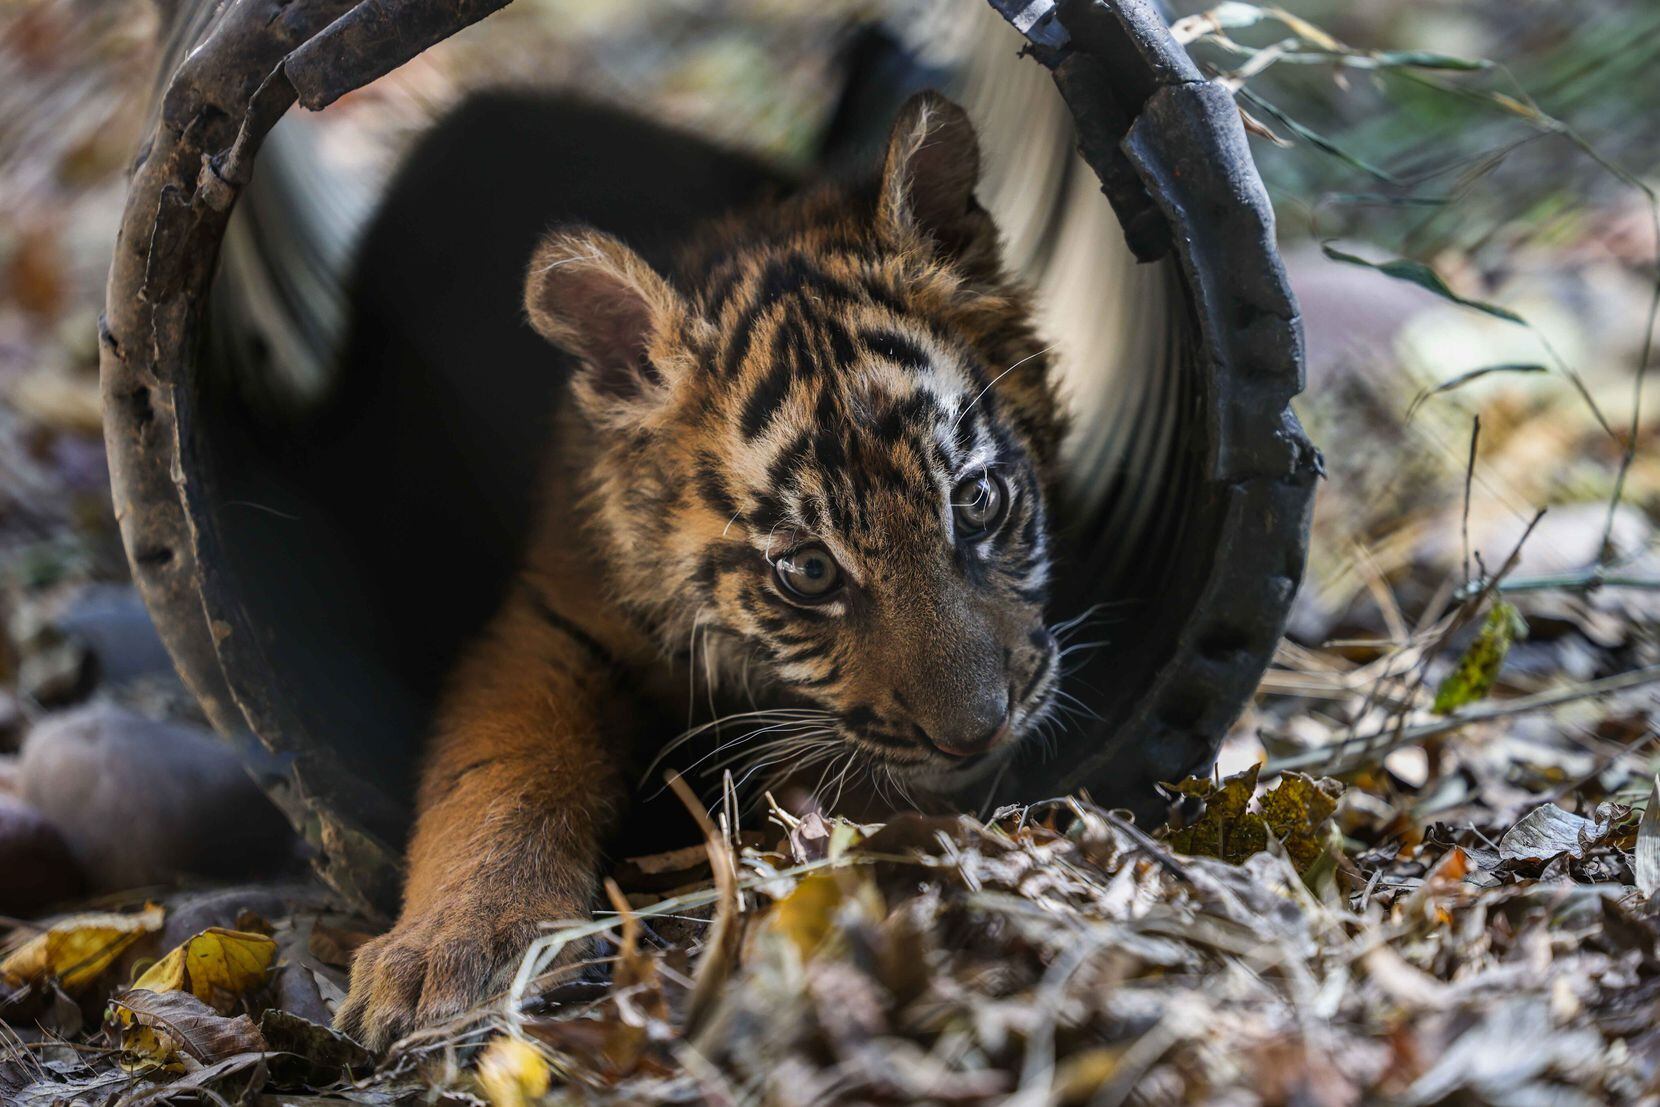 Dallas Zoo's 3-month-old Sumatran tiger cub gearing up for full